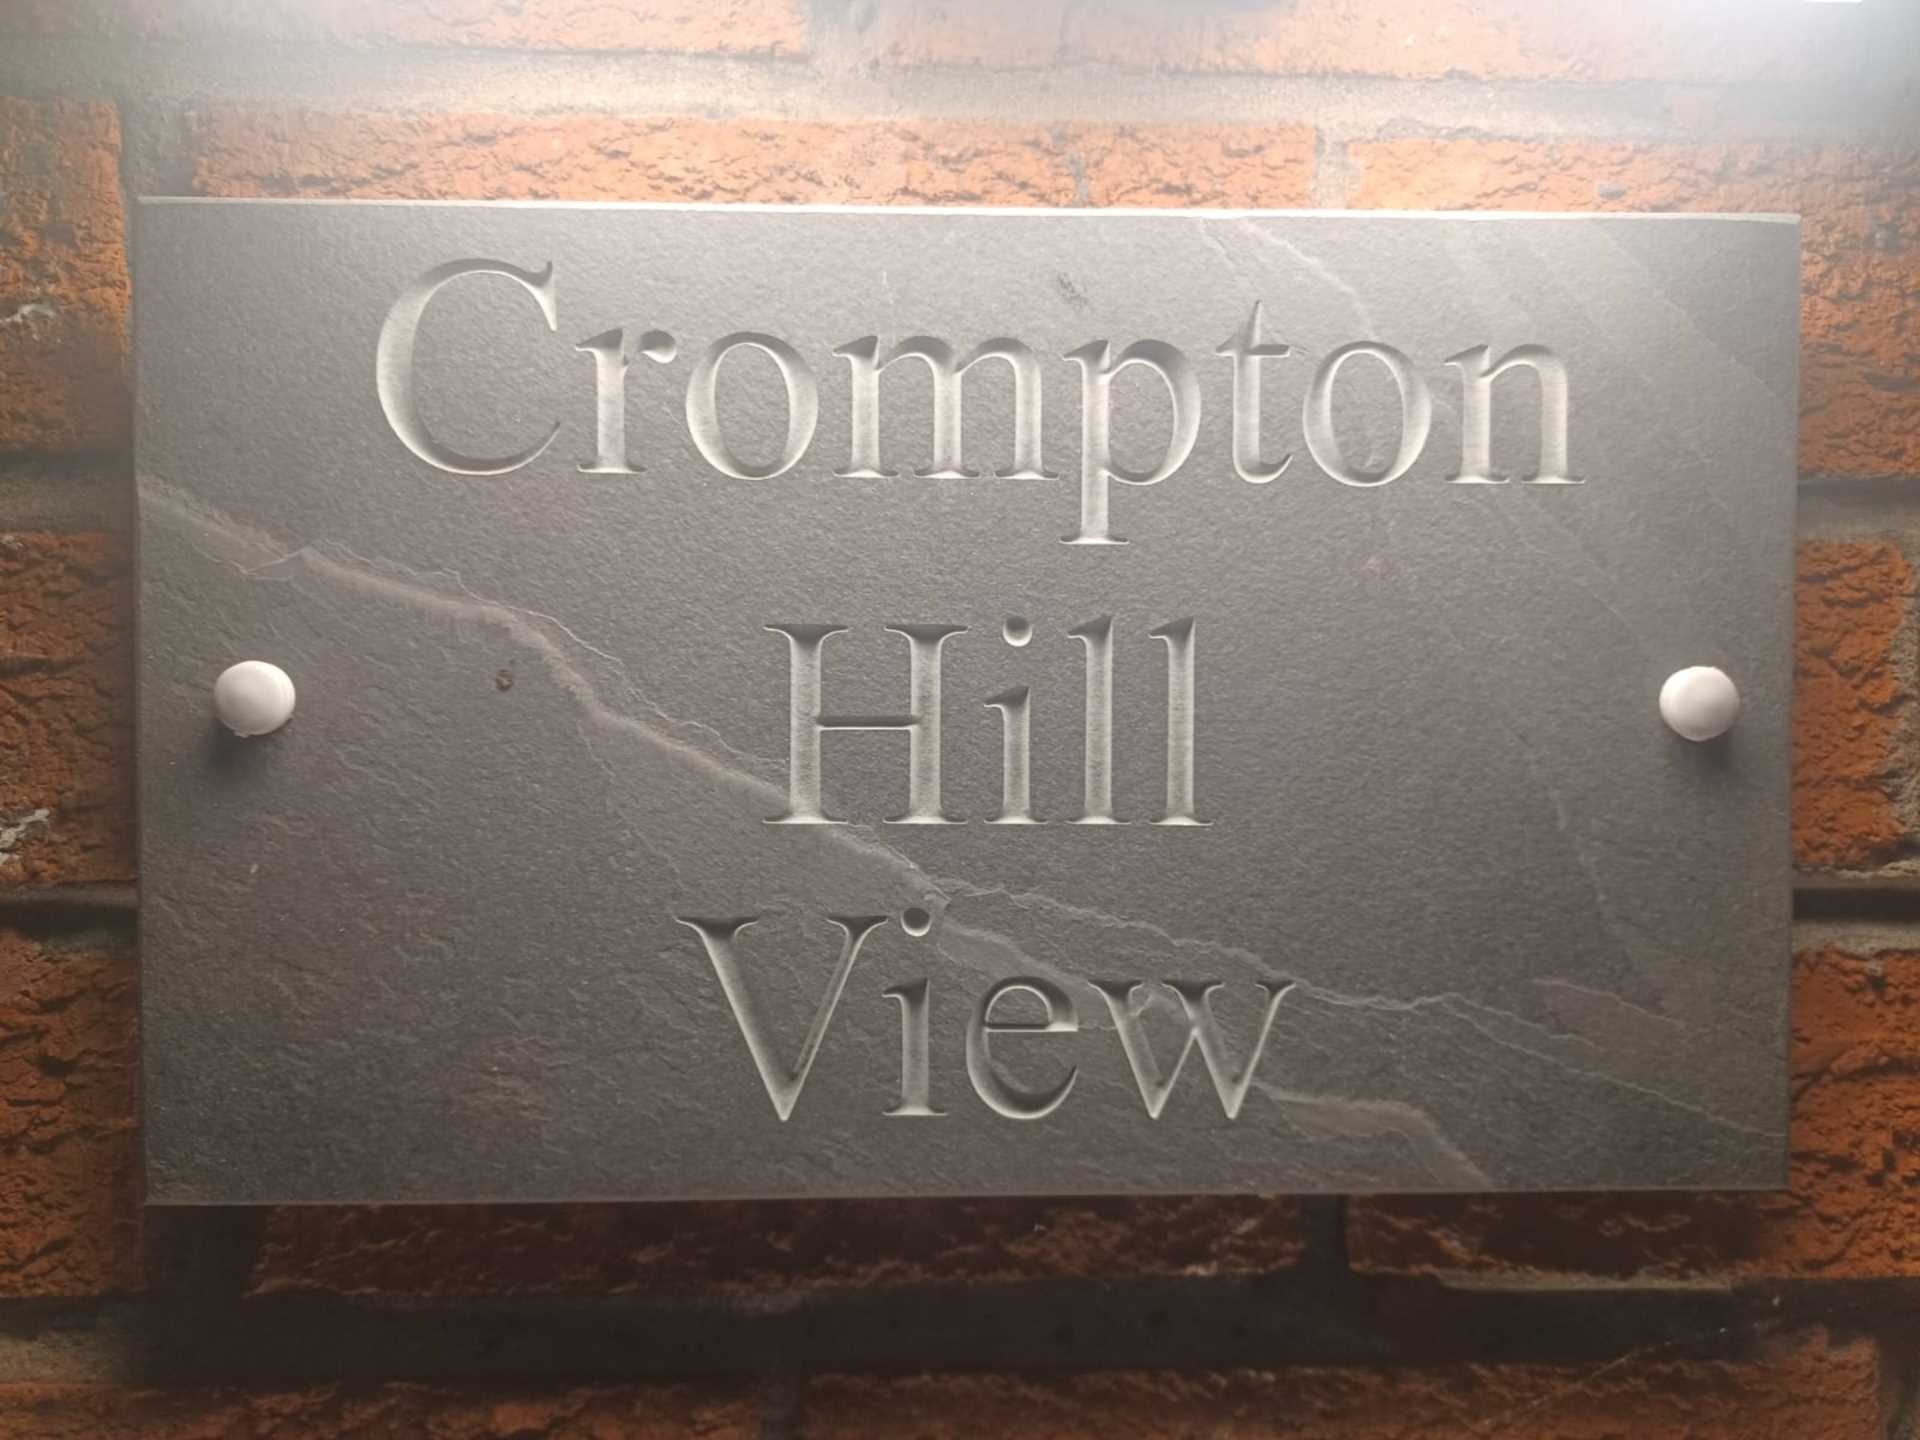 Crompton Hill View, Old Brook Close, High Crompton, Shaw, Image 25